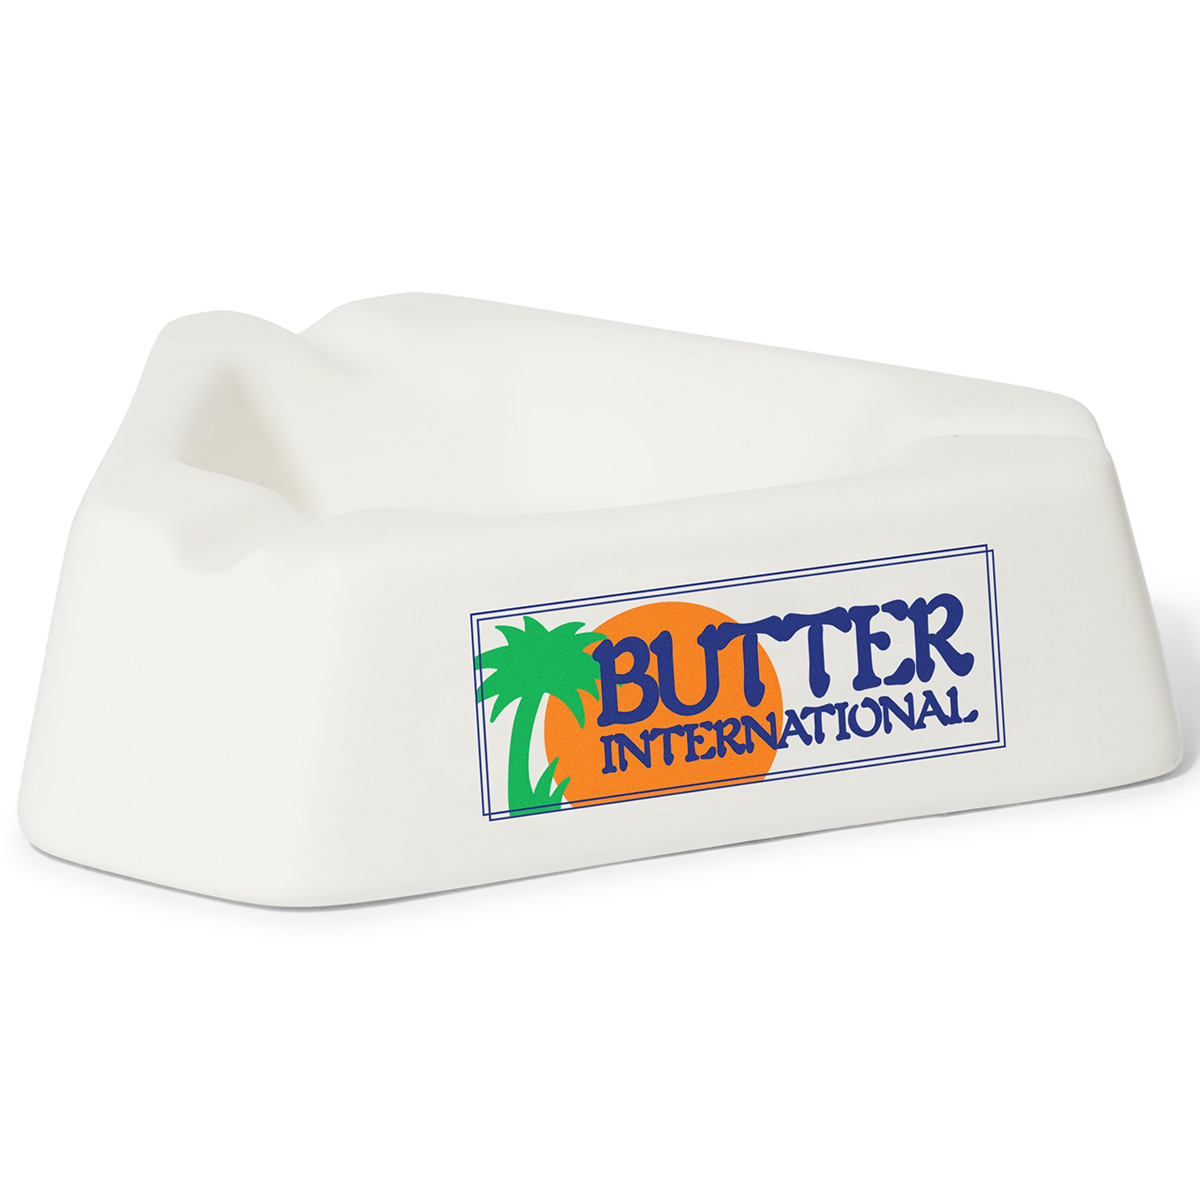 Butter Goods Vacation Ash Tray White